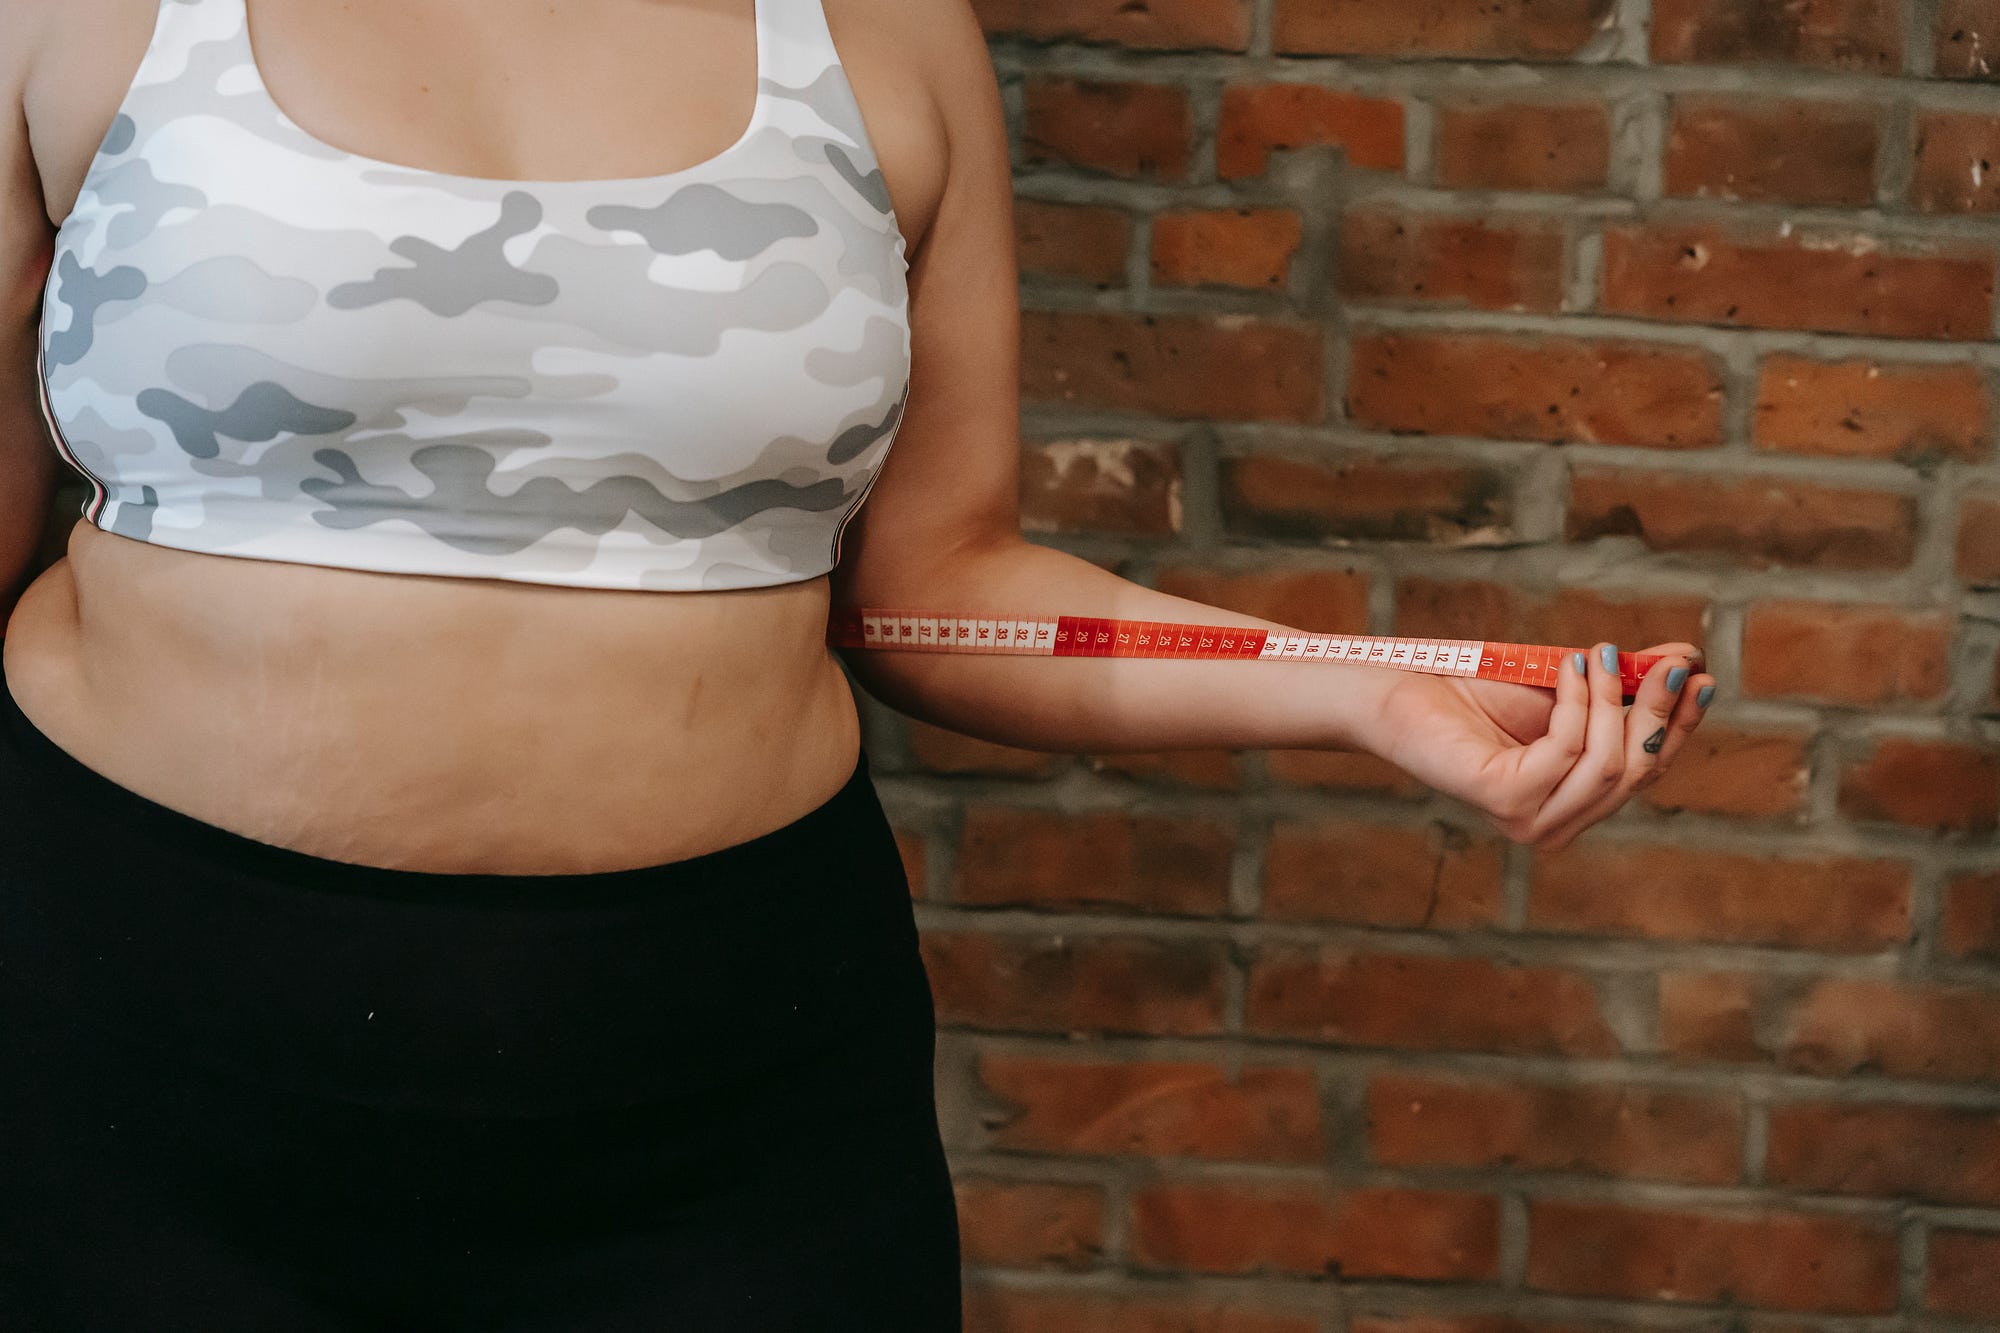 Dear Women, Shall We Stop Obsessing About Having Flat Abs? by Marta Brzosko Medium